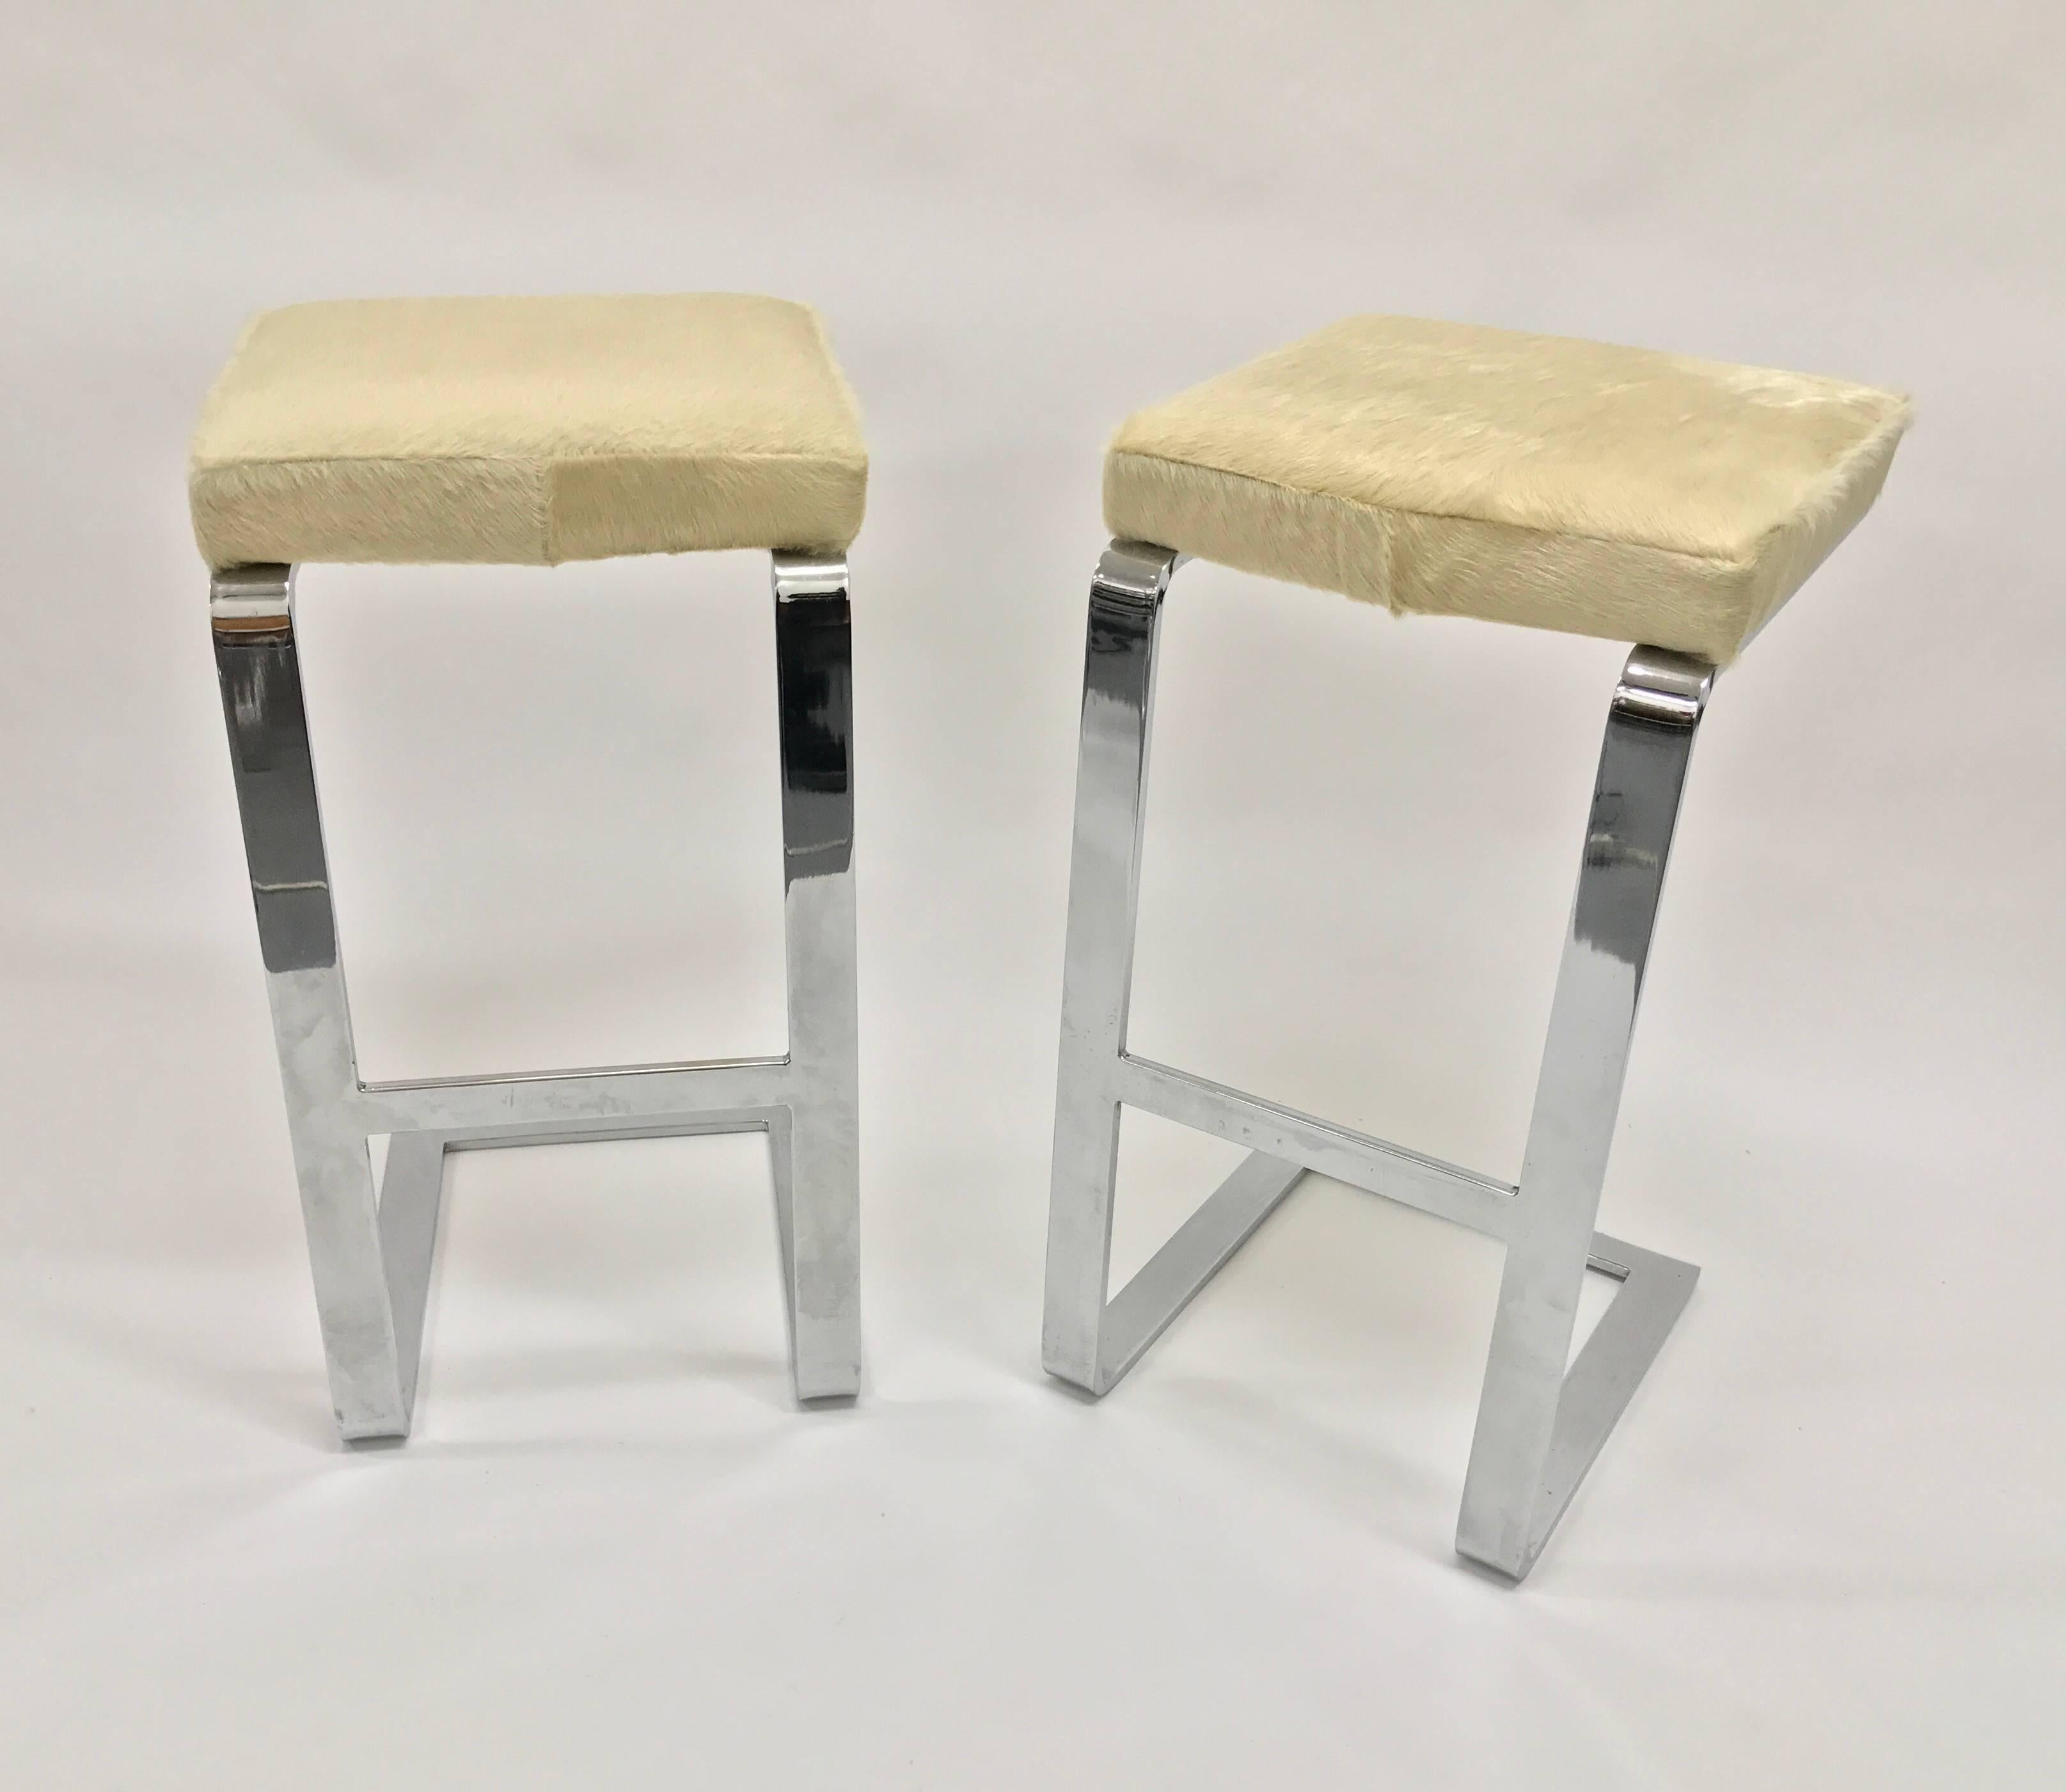 Pair of chrome flat bar cantilever bar stools with cowhide covered seats by Pace Collection, 1980s.